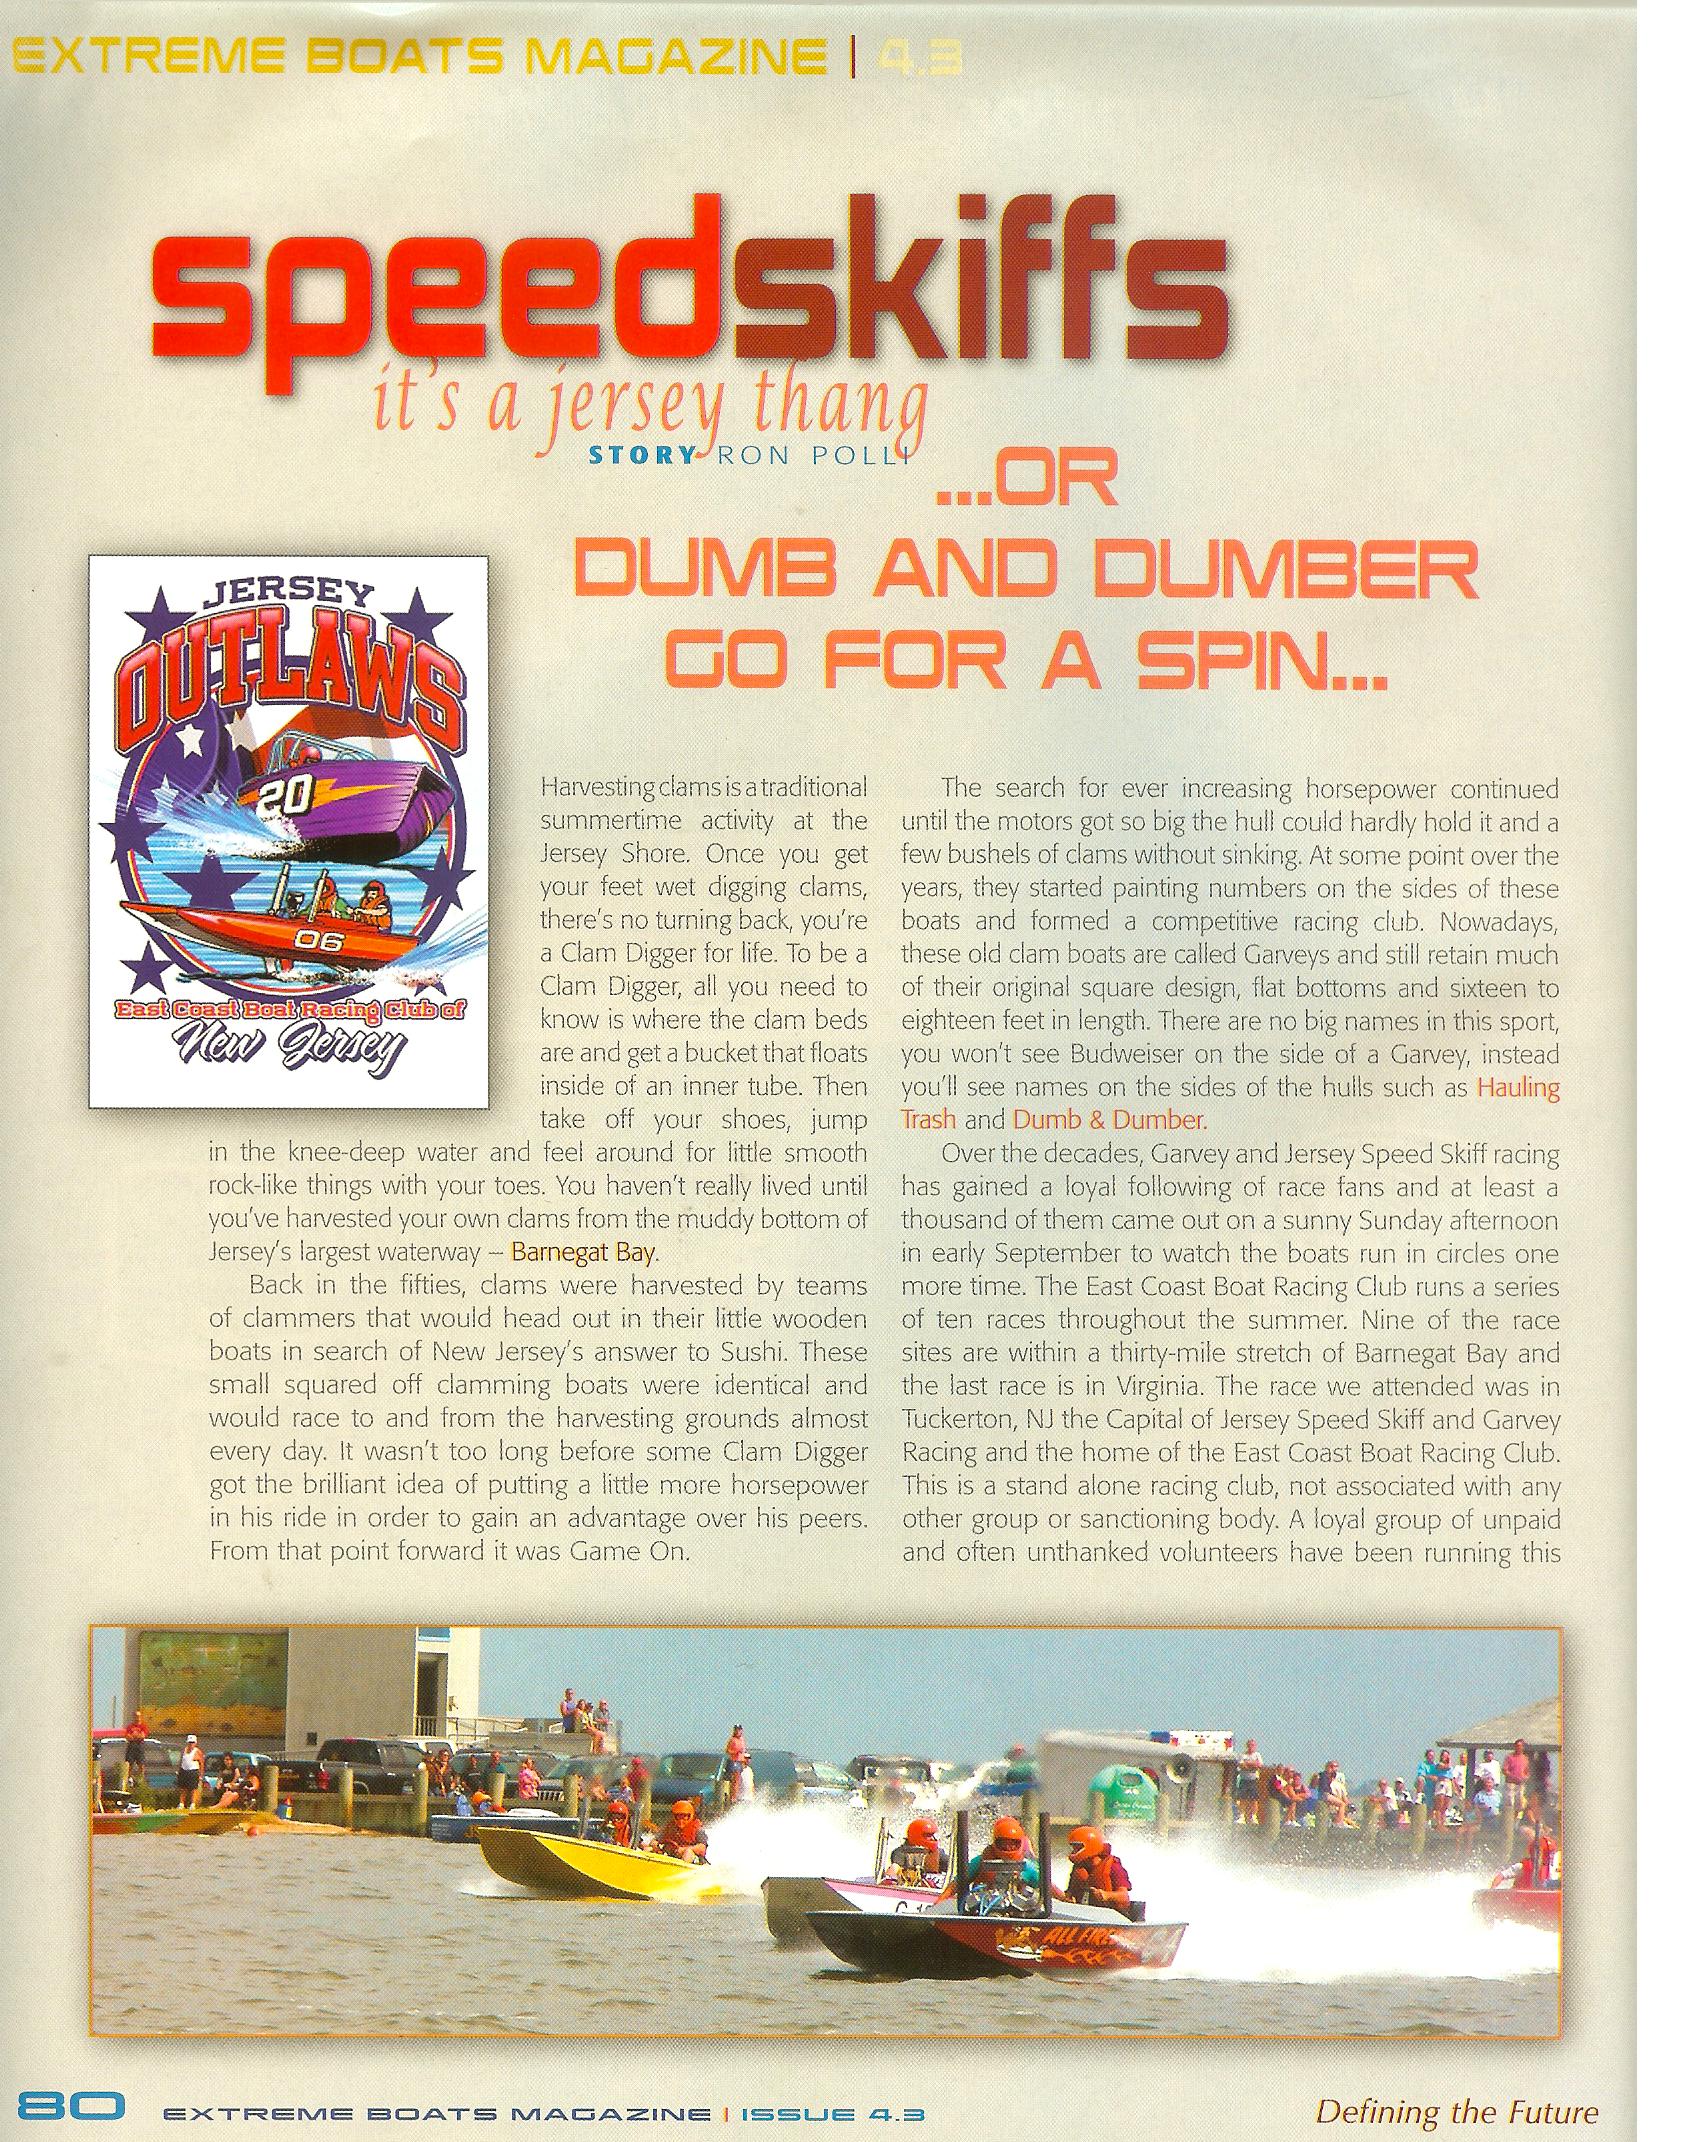 extremeboats2007pg80.jpg